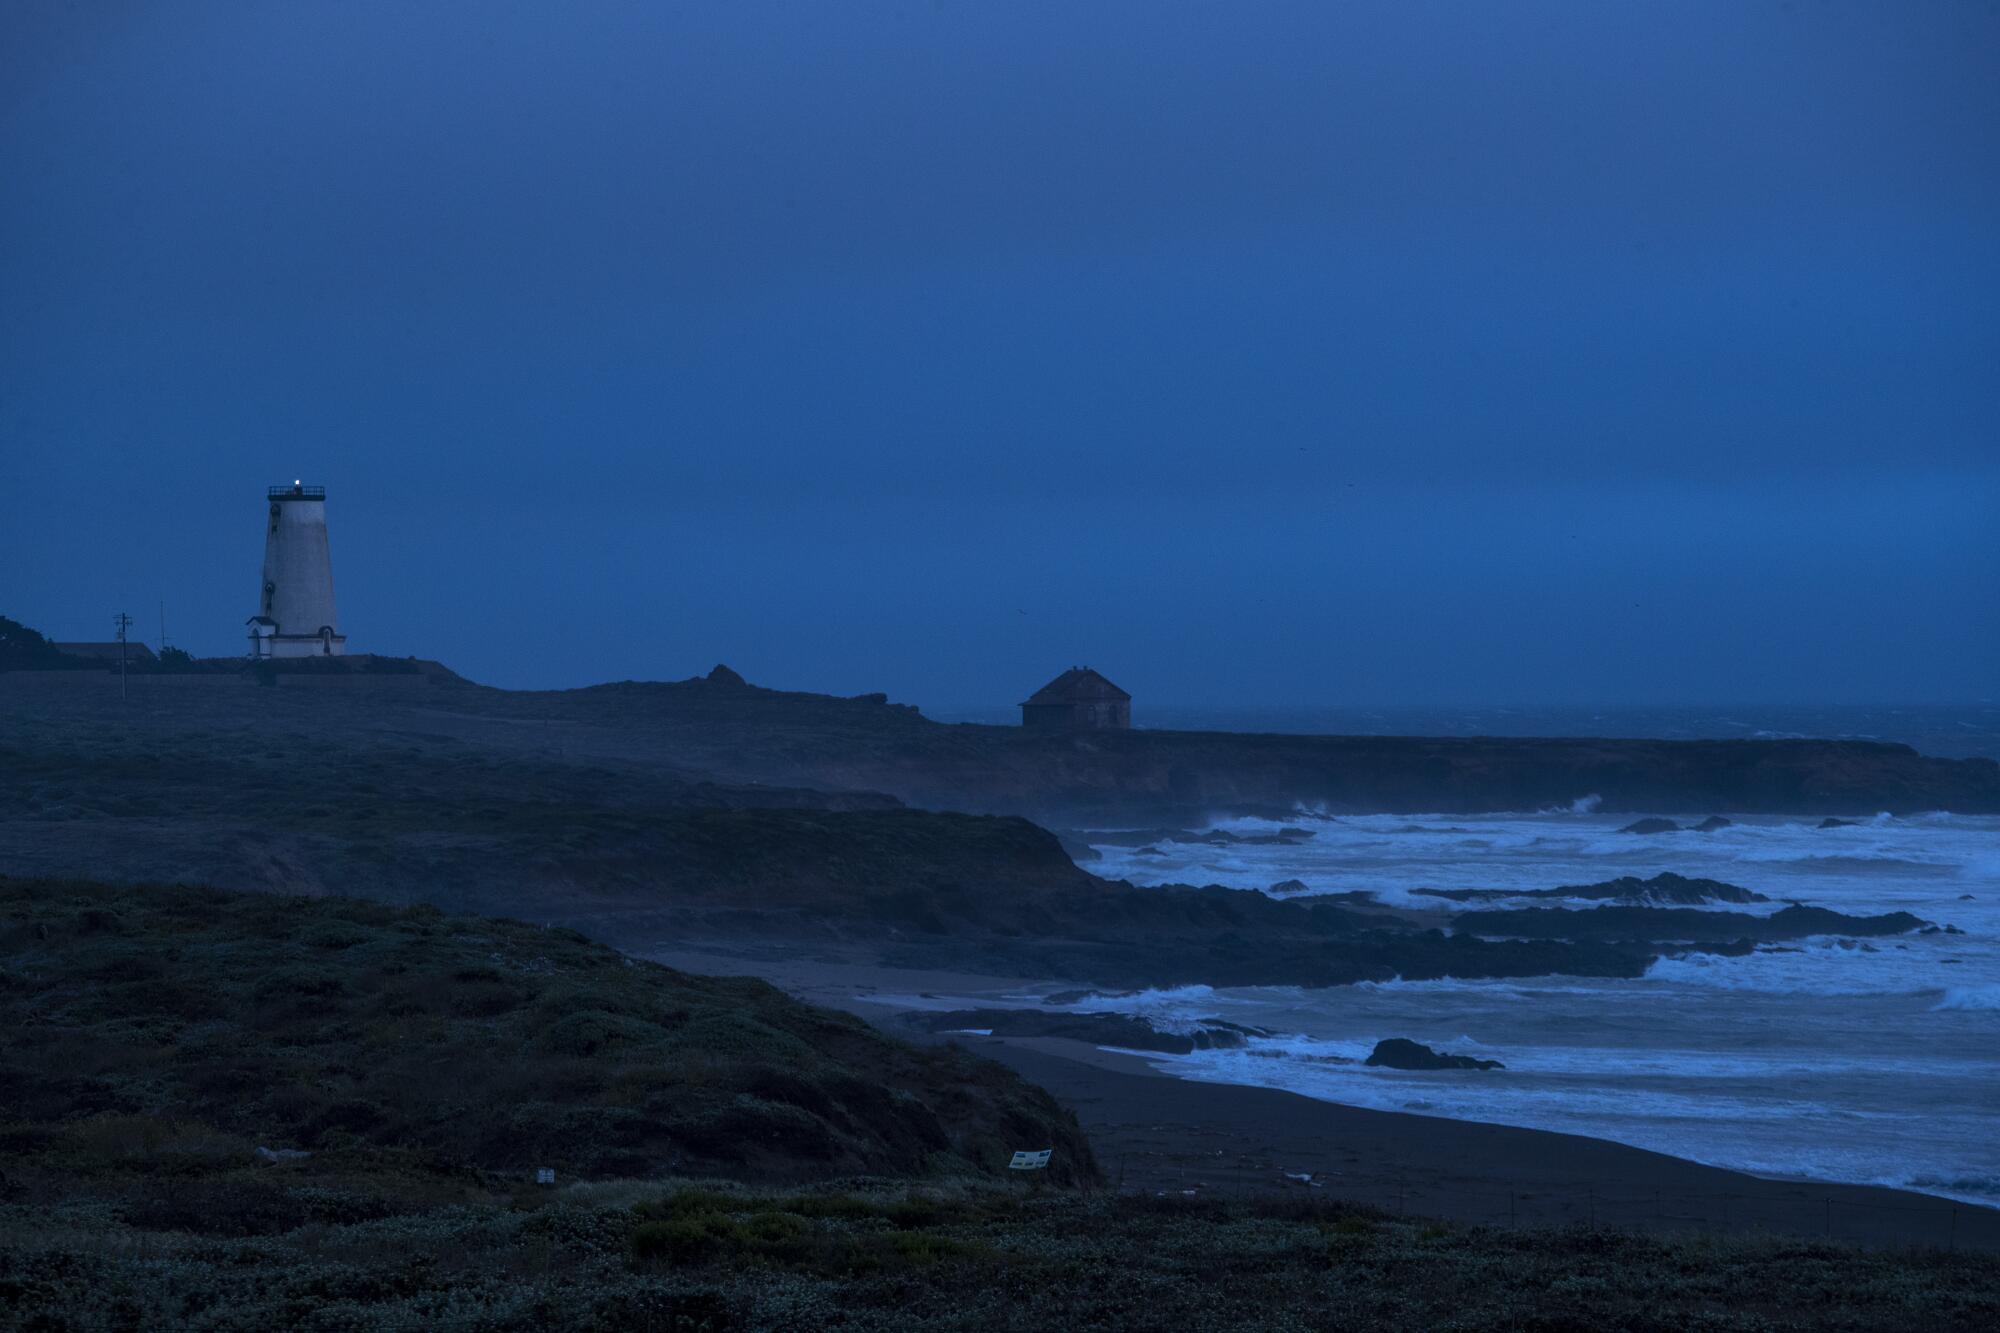 At dusk, a lighthouse and a lone building are silhouetted next to the surf.